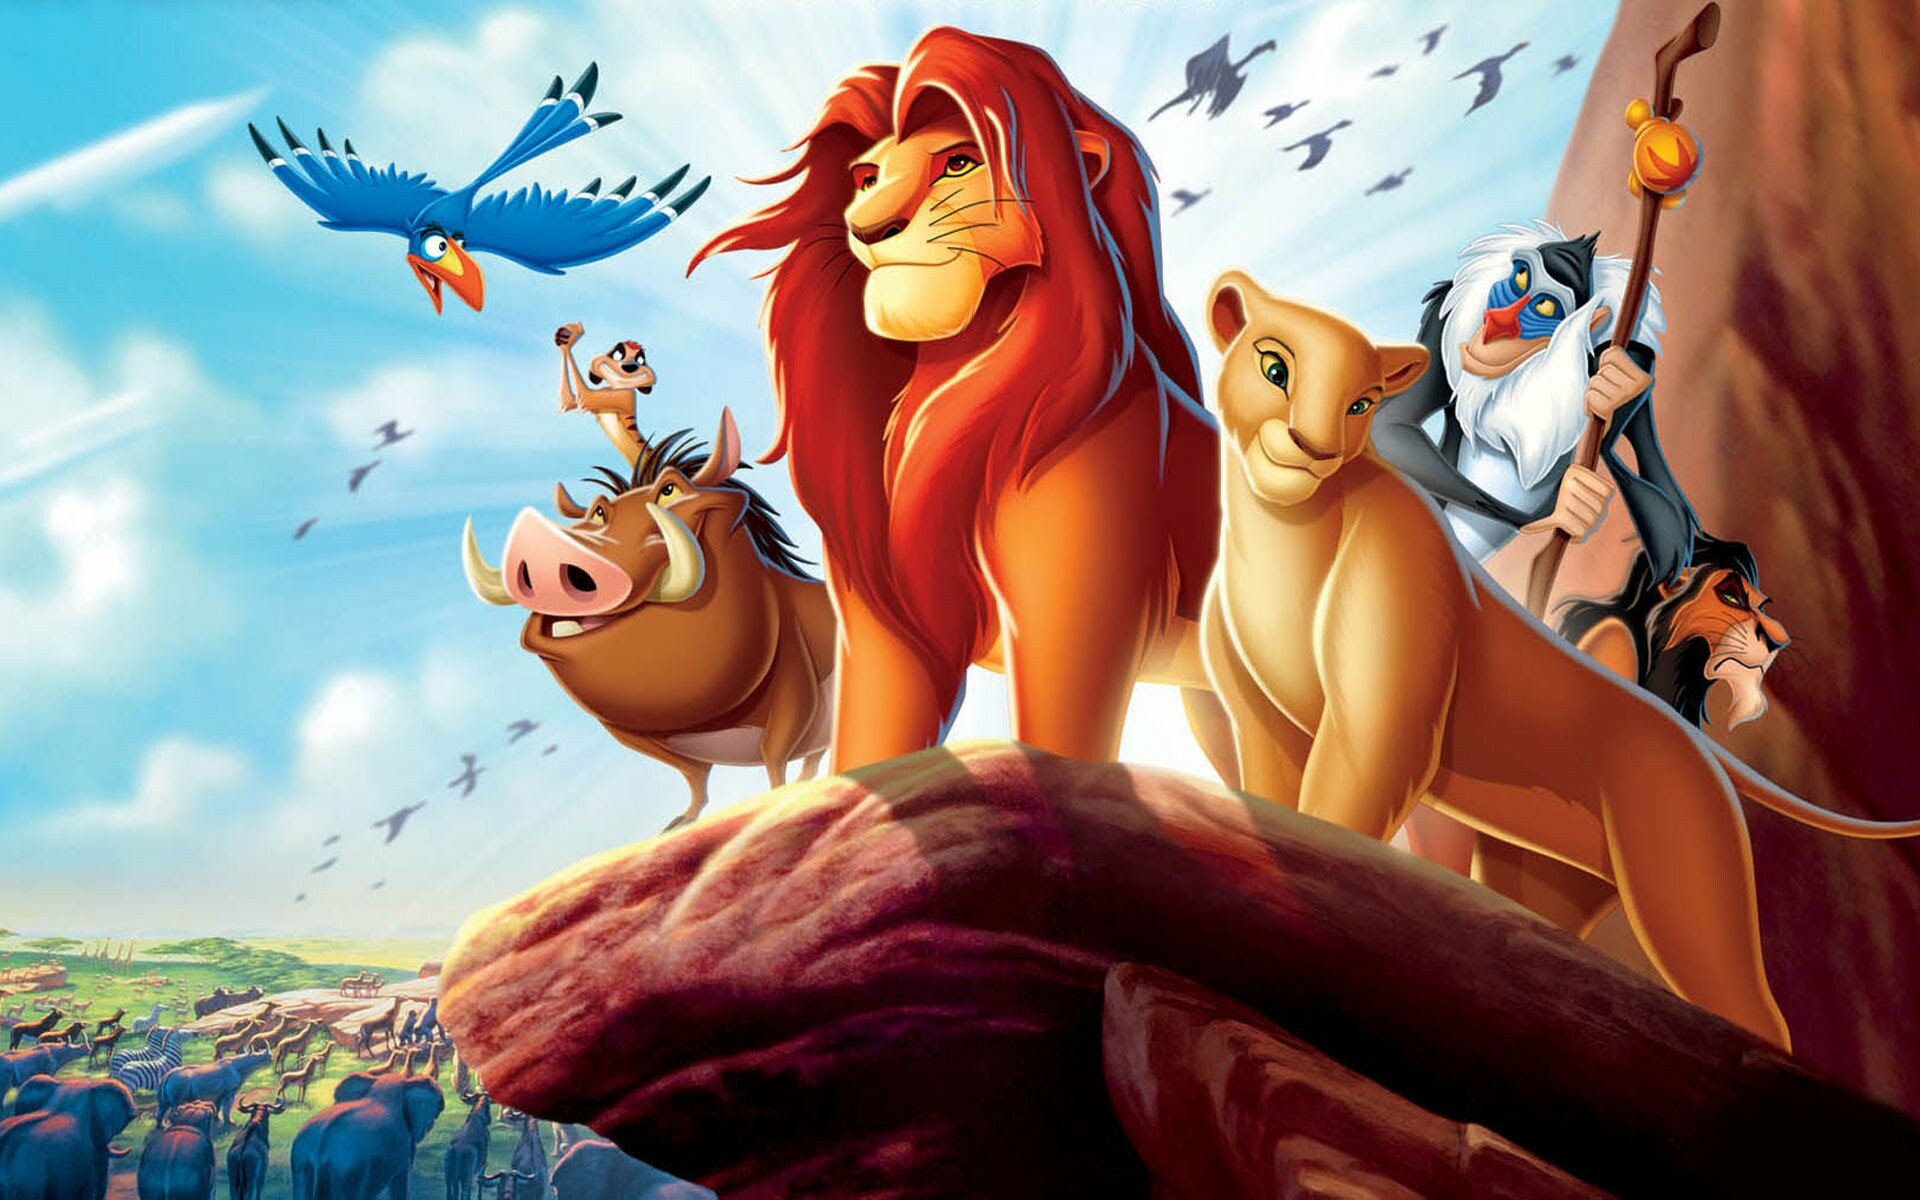 The Lion King: Disney's epic adventure follows the story of Simba. 1920x1200 HD Wallpaper.